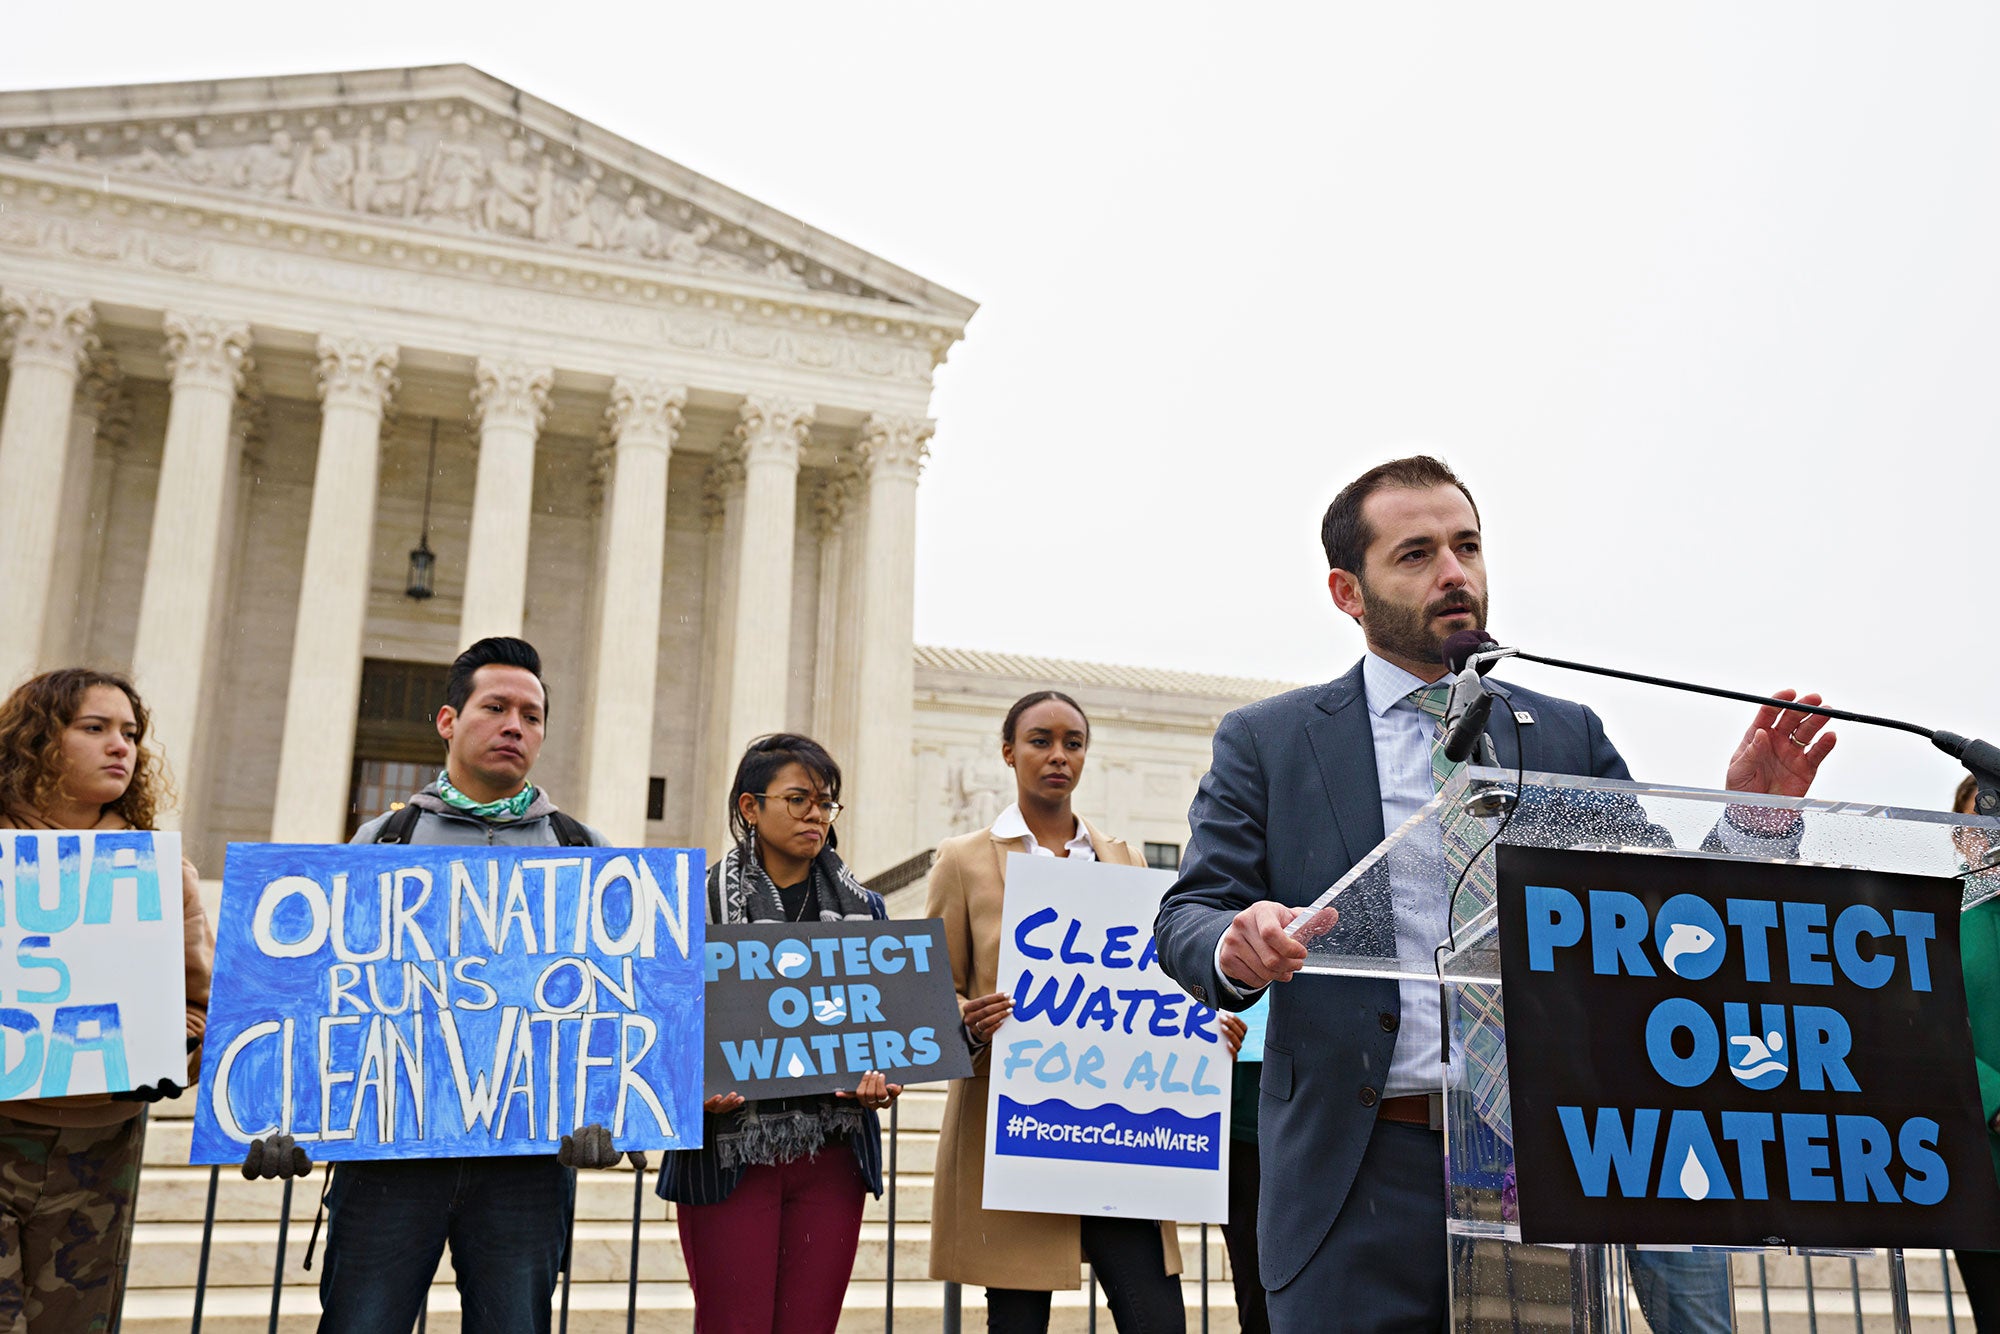 Raul Garcia, Earthjustice’s Legislative Director for Healthy Communities on the Policy & Legislation team, speaks in support of the Clean Water Act outside of the Supreme Court, as the high court heard arguments in the case of Sackett v. EPA, which revolves around which waterways deserve protections under the Clean Water Act.